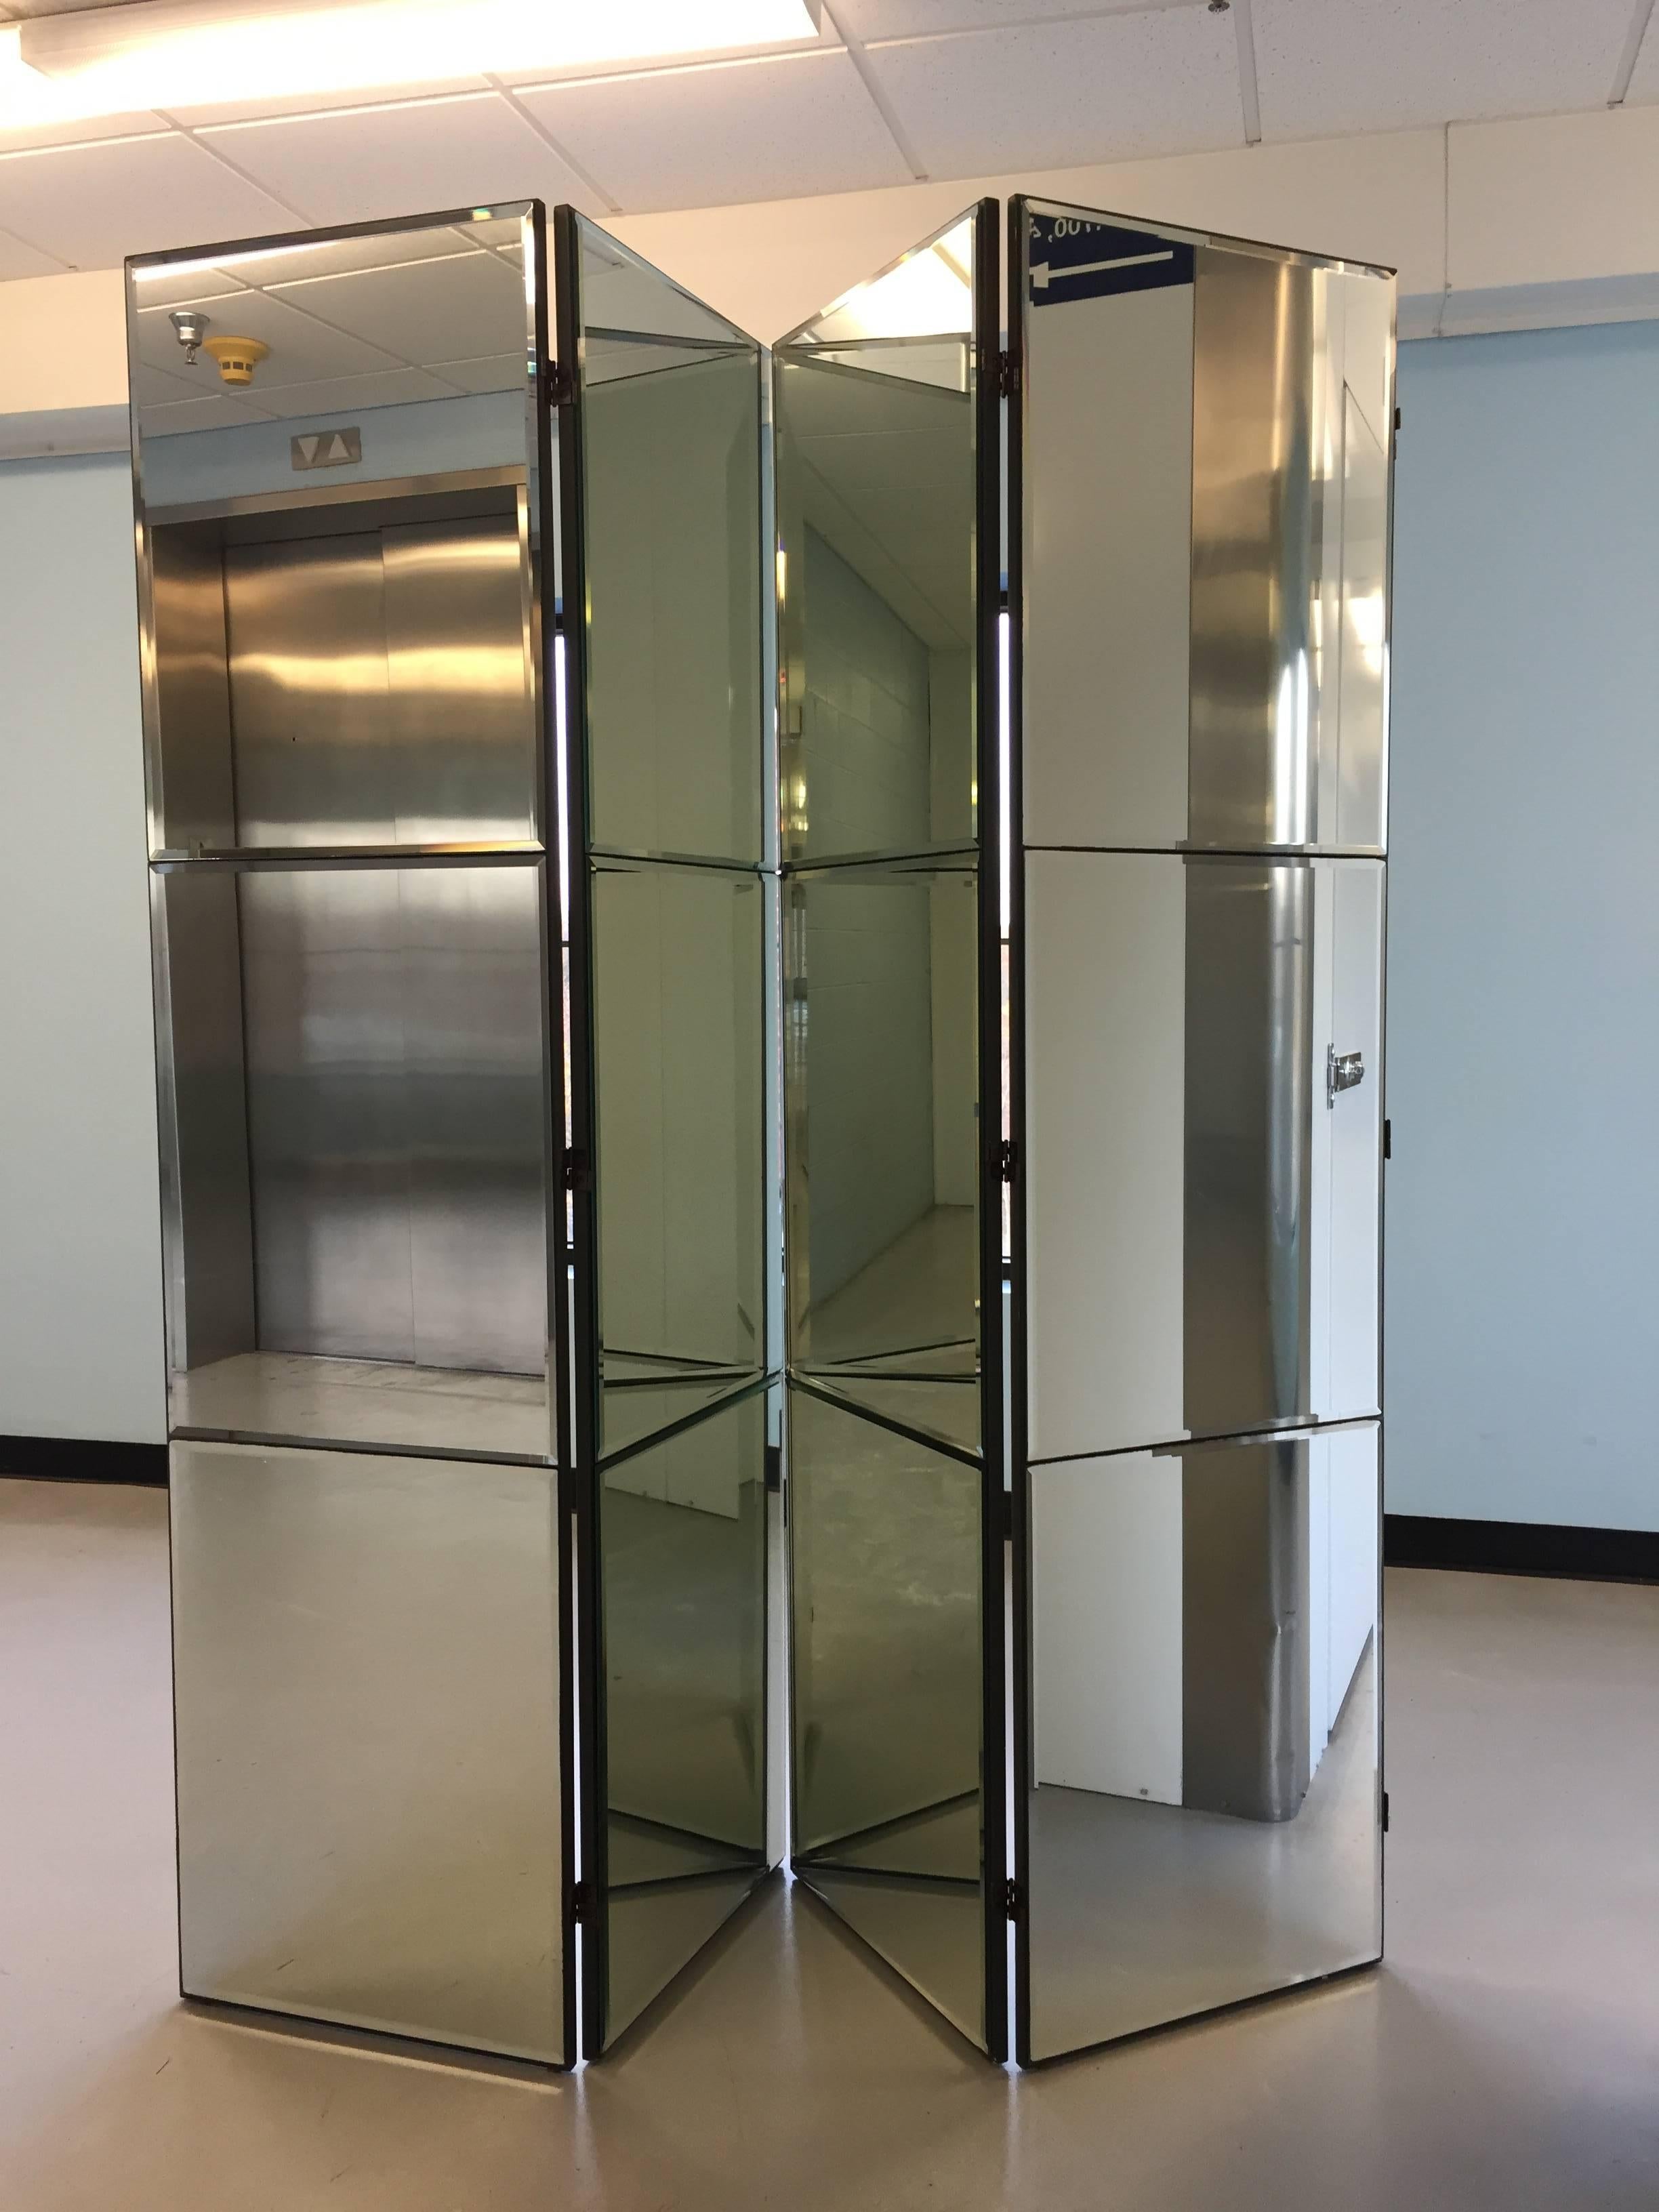 1950s large beveled square four panel screen room divider, with a creme colored painted back, in all original condition.

Overall measurements wide 19.75 each panel when angled takes up less than 80